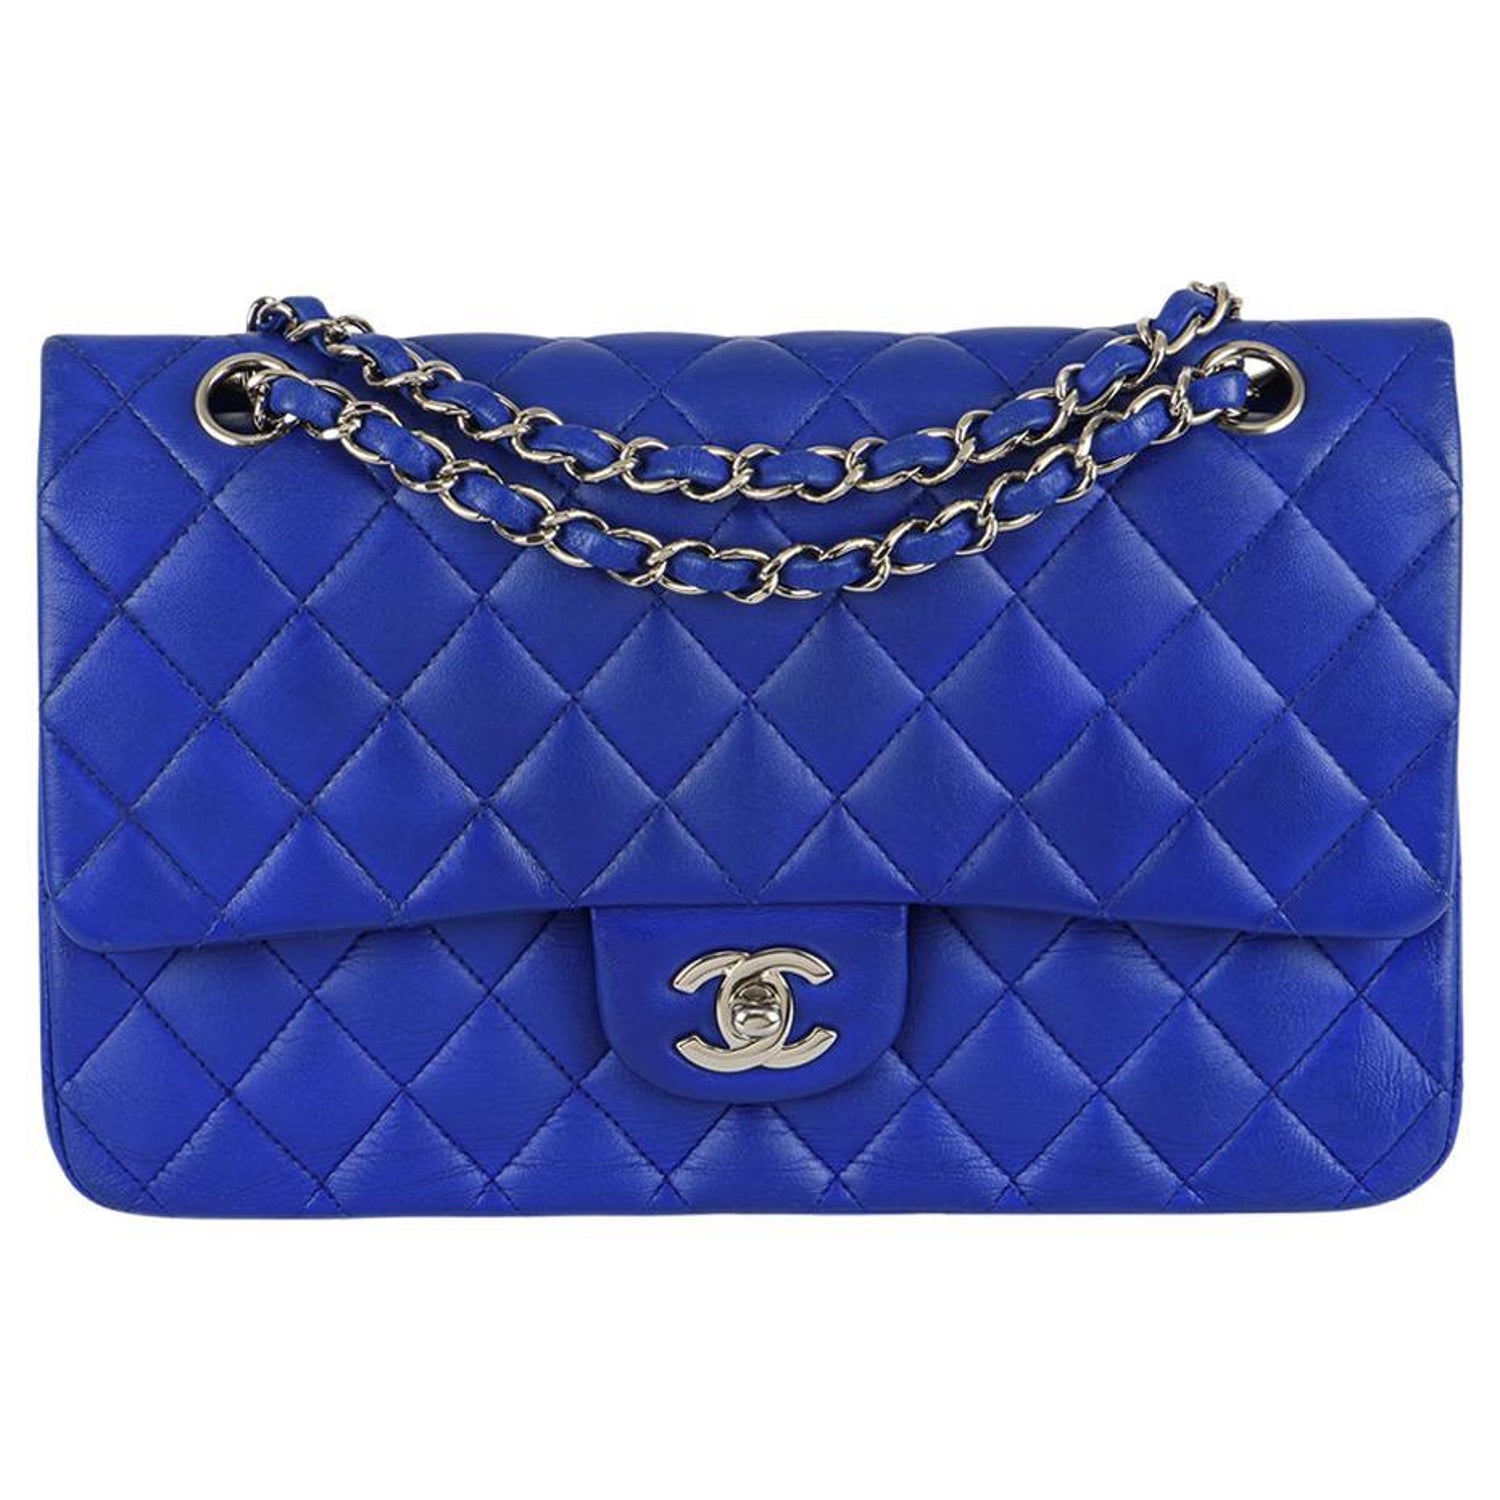 Chanel Blue Lambskin Classic Double Bag SHW at